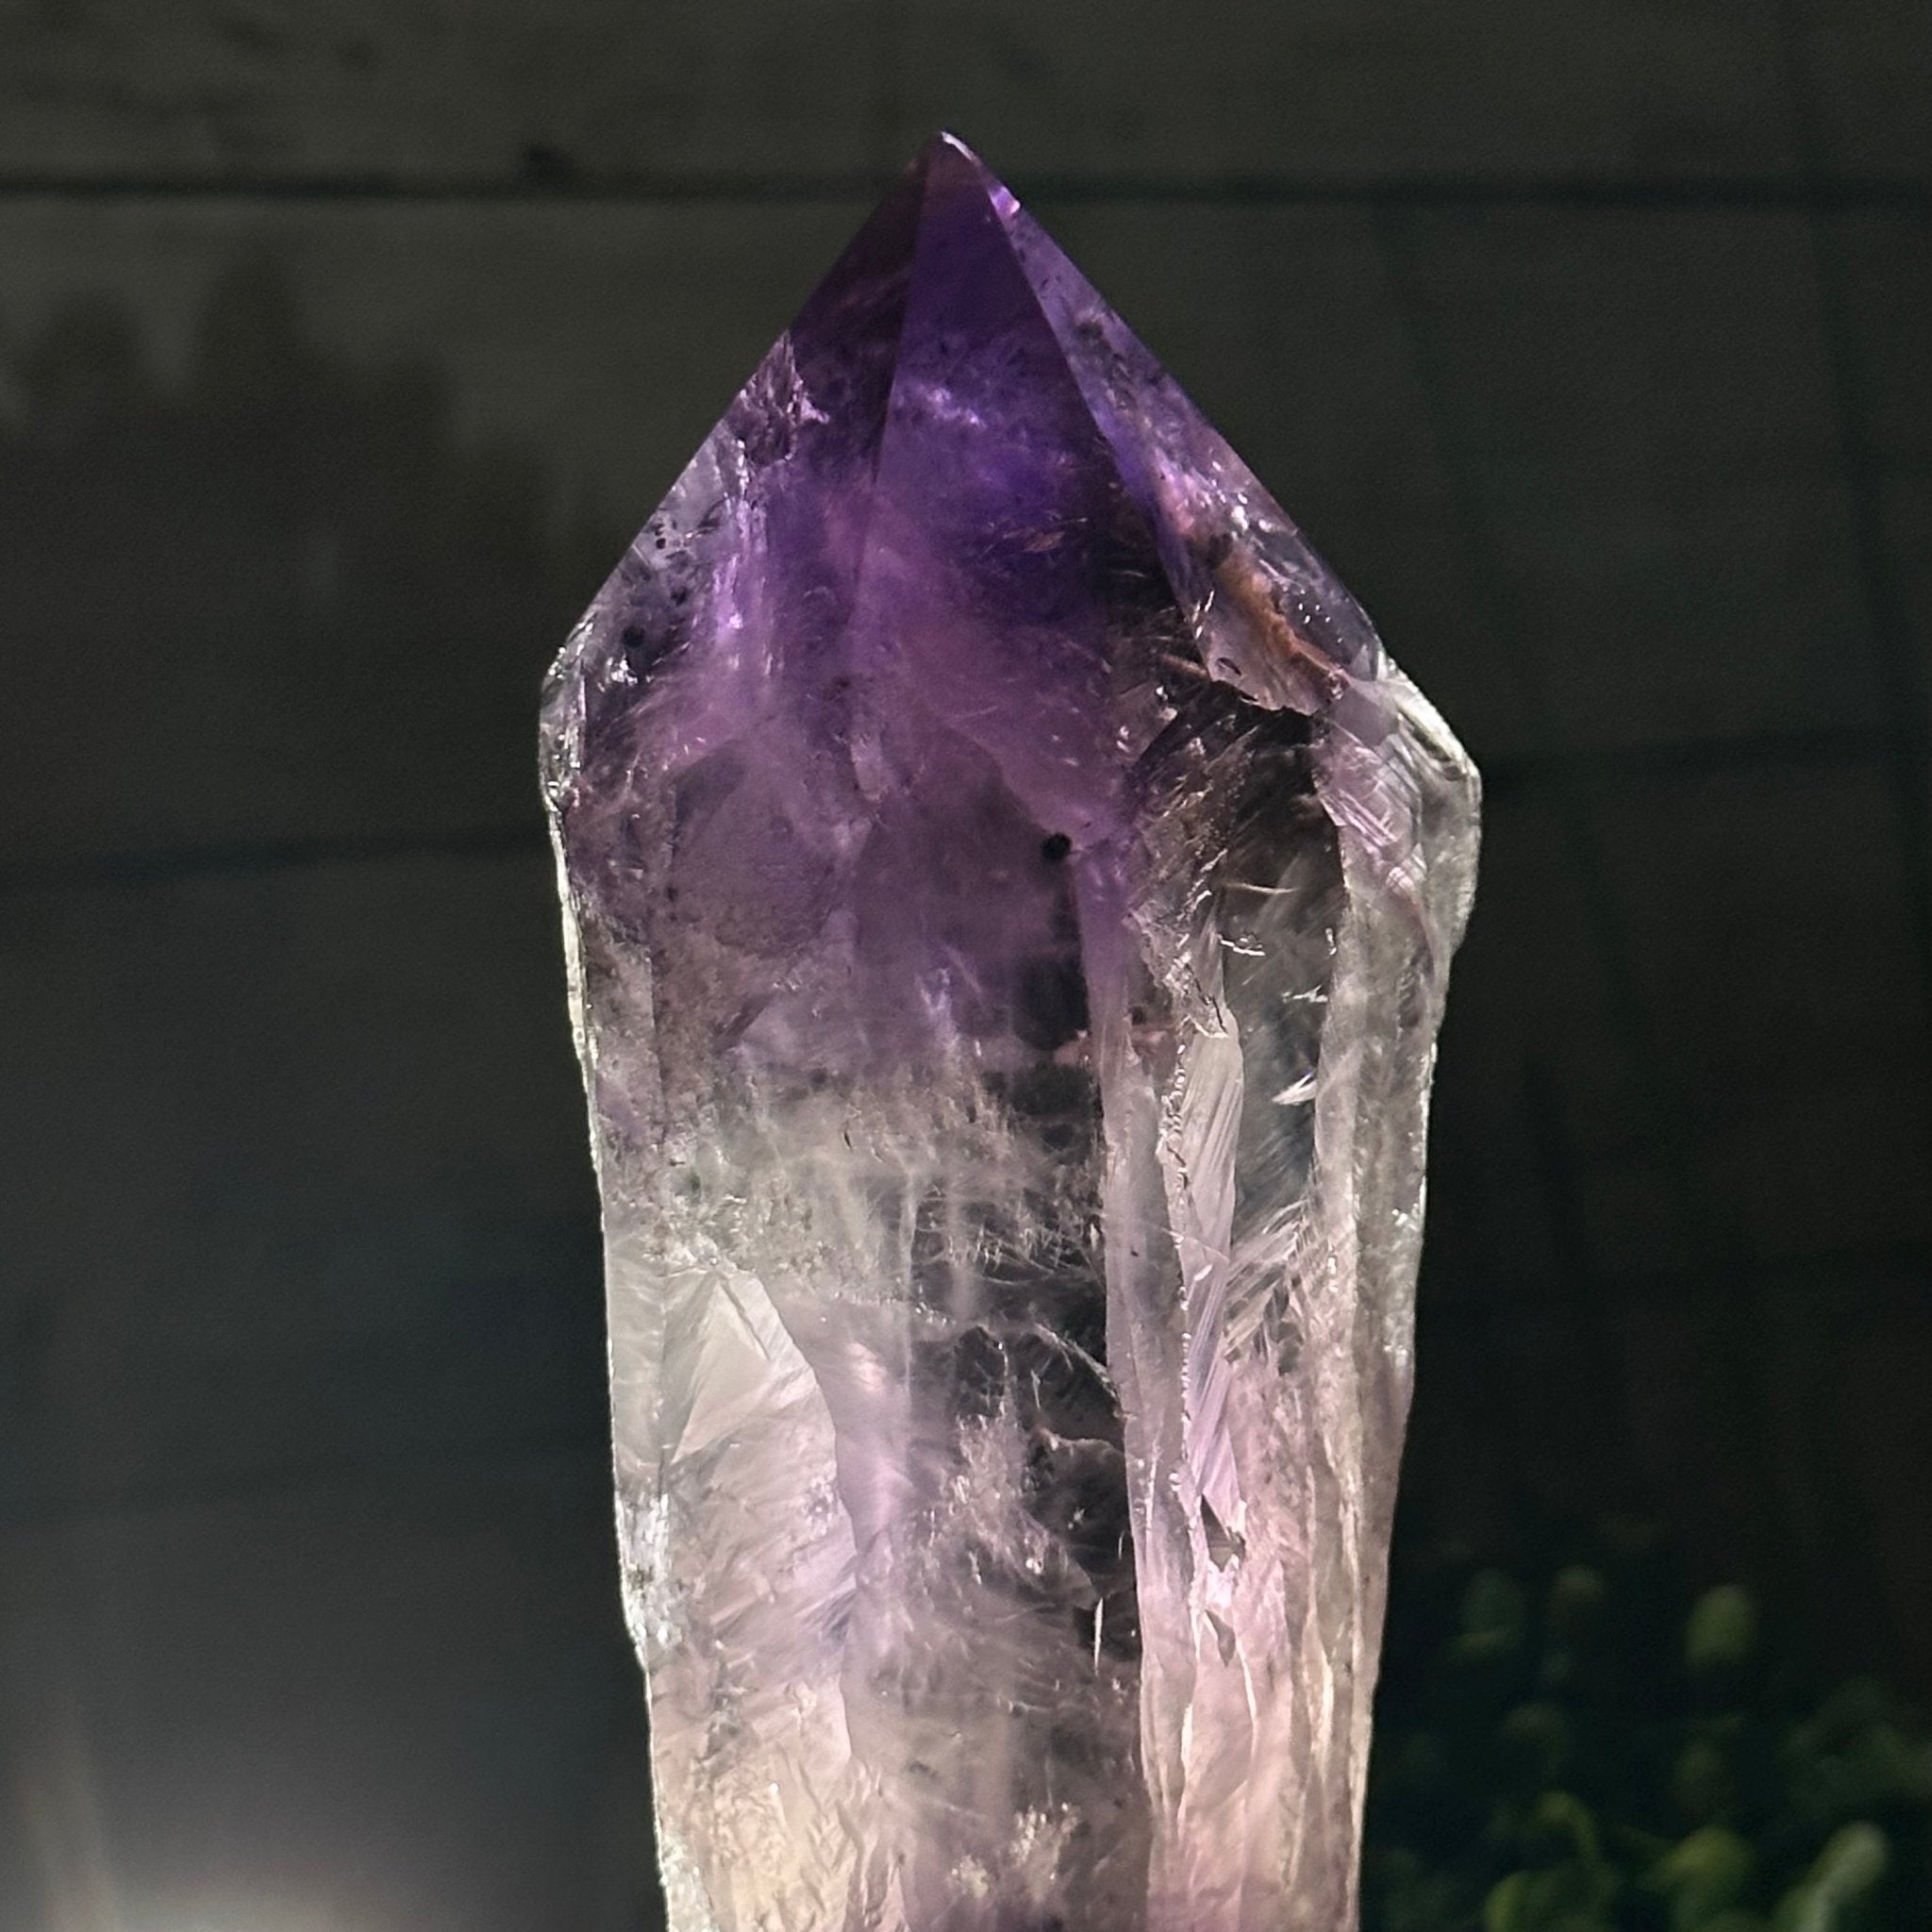 Super Quality Amethyst Wand on a Metal Stand, 1.6 lbs & 11" Tall #3123AM-002 - Brazil GemsBrazil GemsSuper Quality Amethyst Wand on a Metal Stand, 1.6 lbs & 11" Tall #3123AM-002Clusters on Fixed Bases3123AM-002